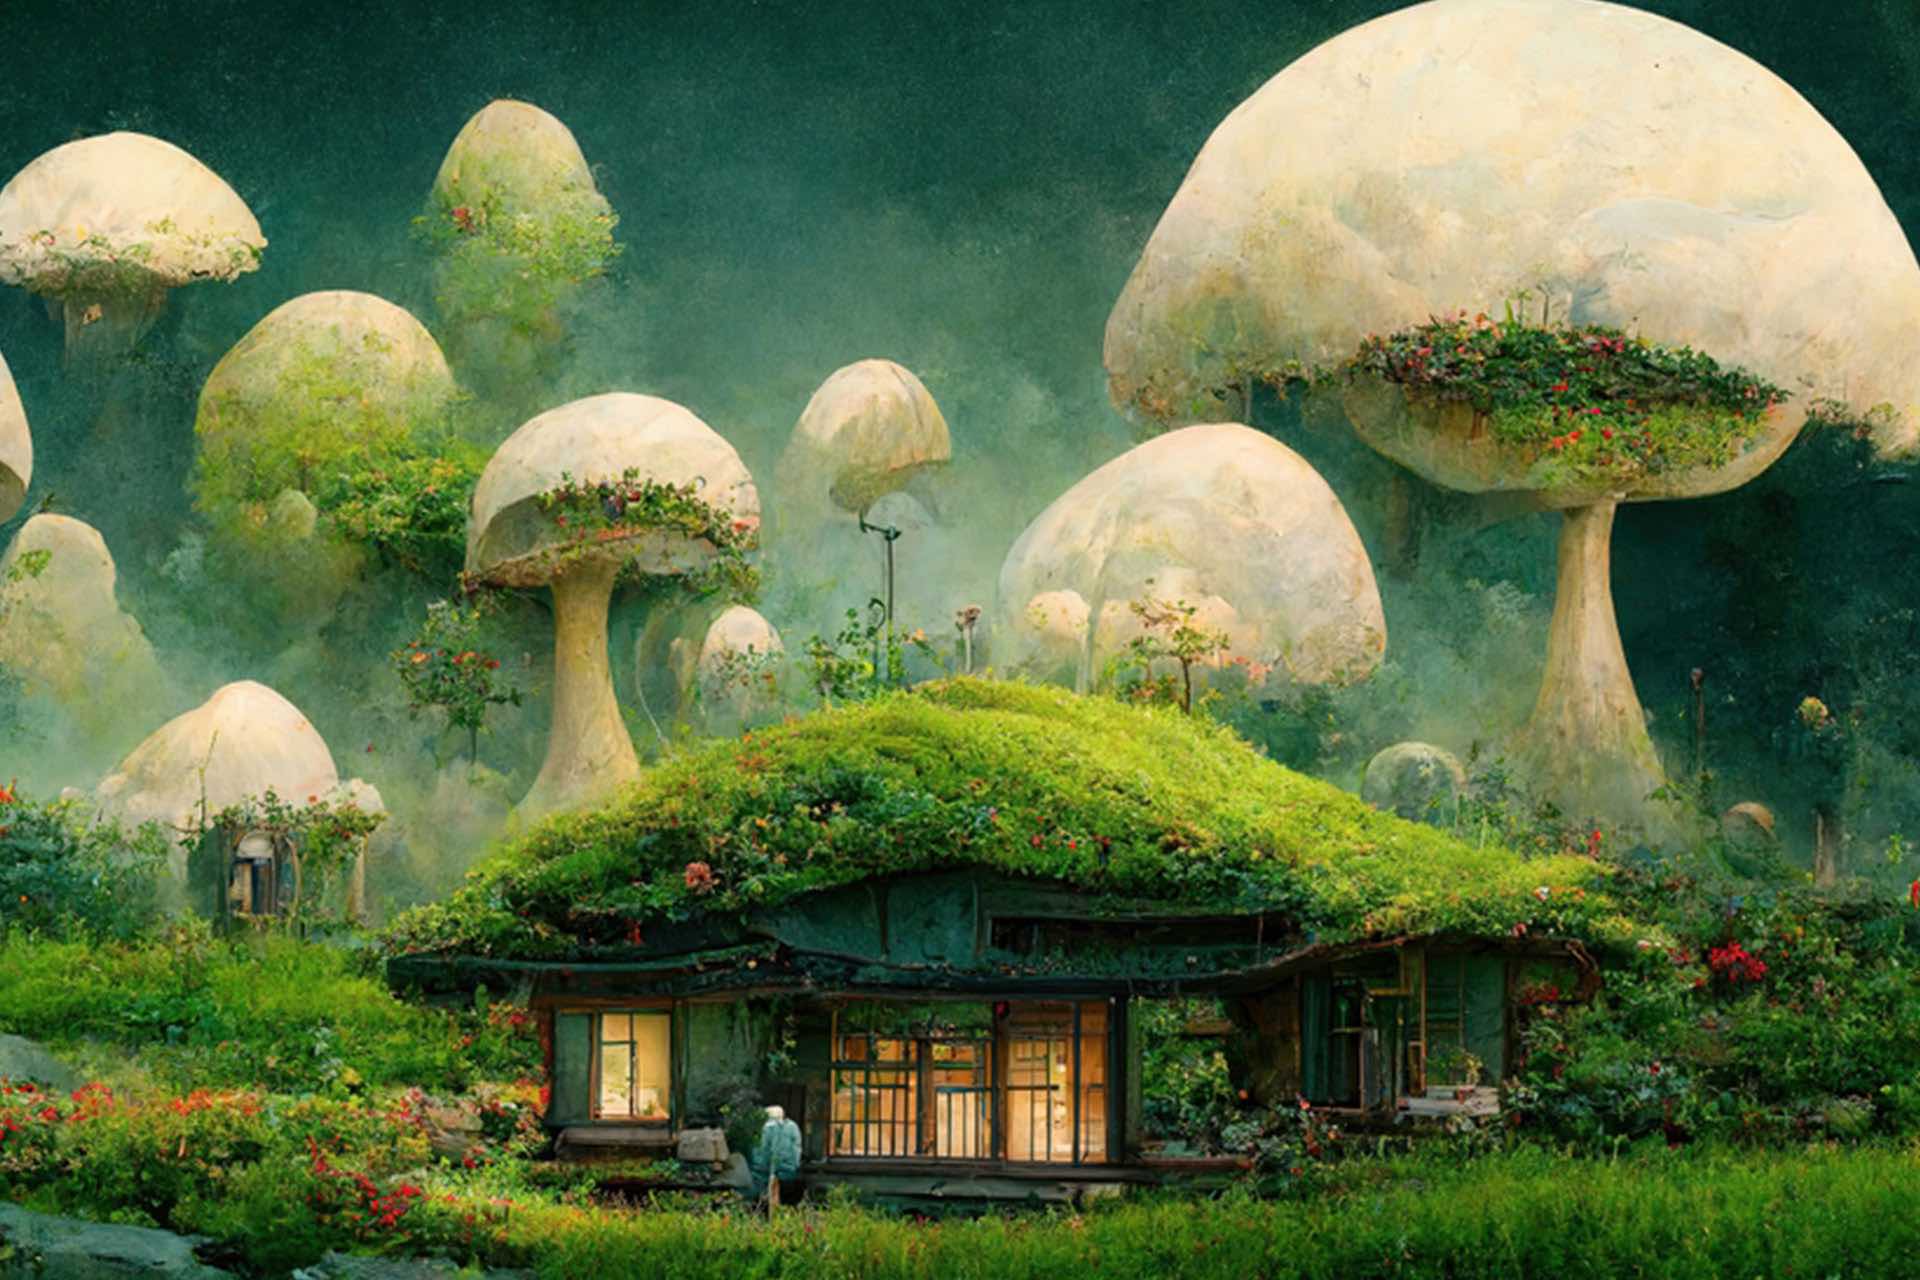 How Mushrooms Can Save the World and Humanity from Crisis - Third Wave